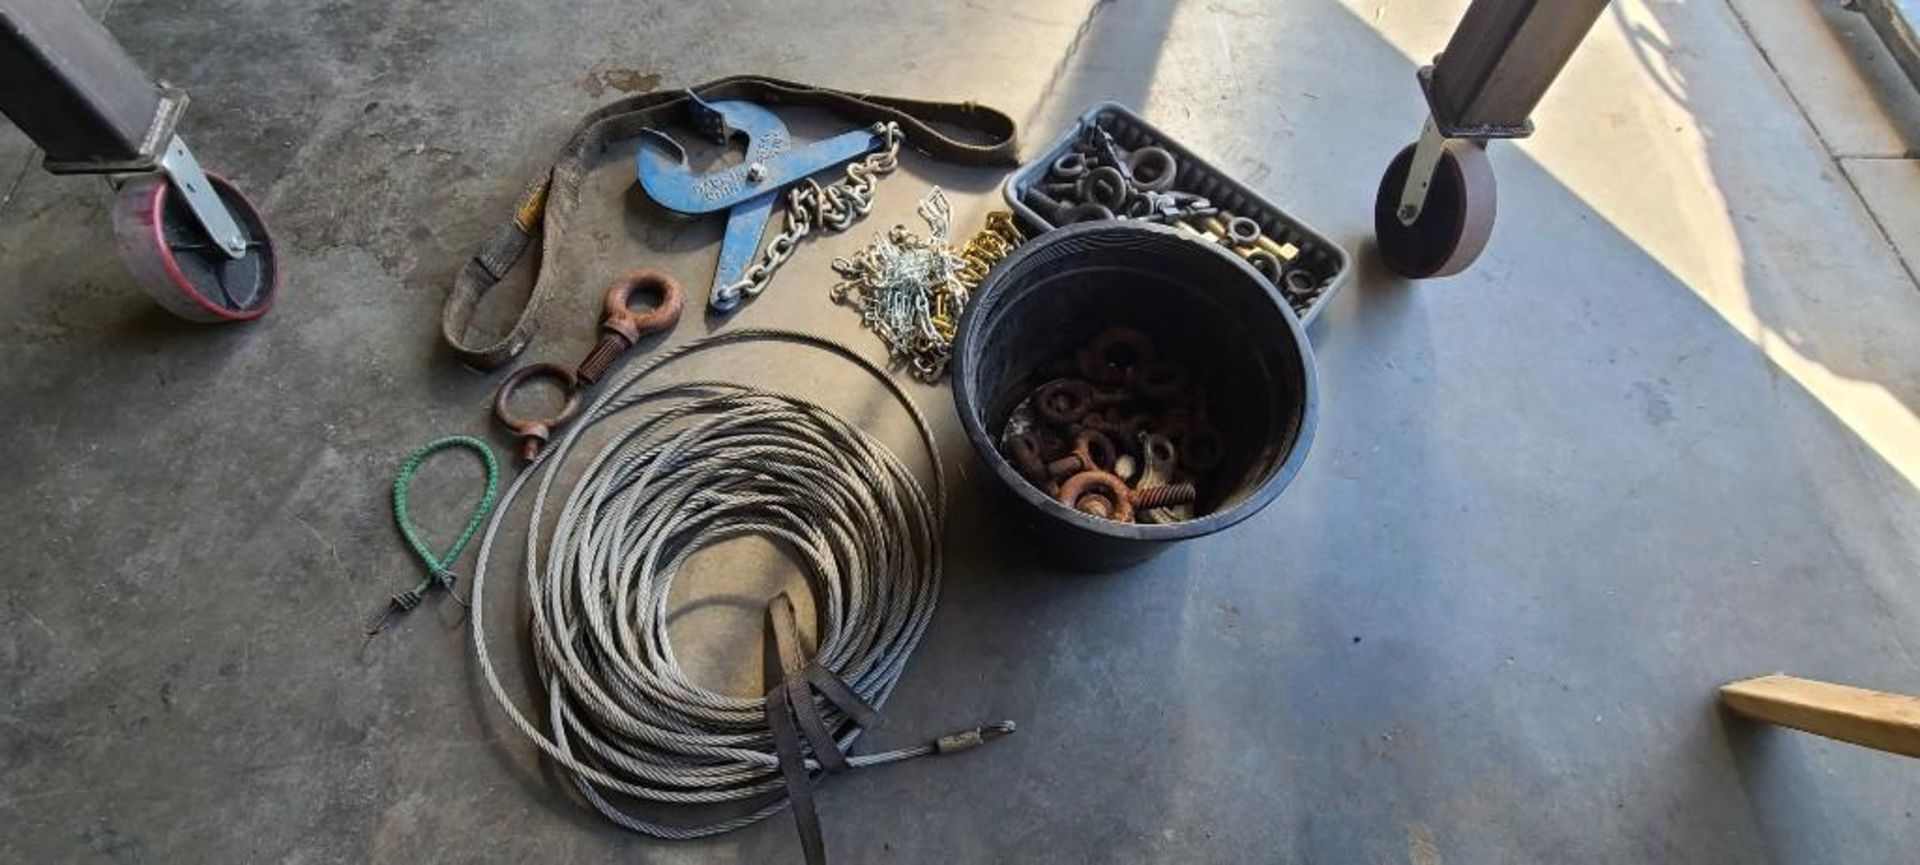 ASSORTED RIGGING SUPPLIES, EYEBOLTS, STEEL CABLE, GRAPPLE, CHAIN - Image 3 of 3